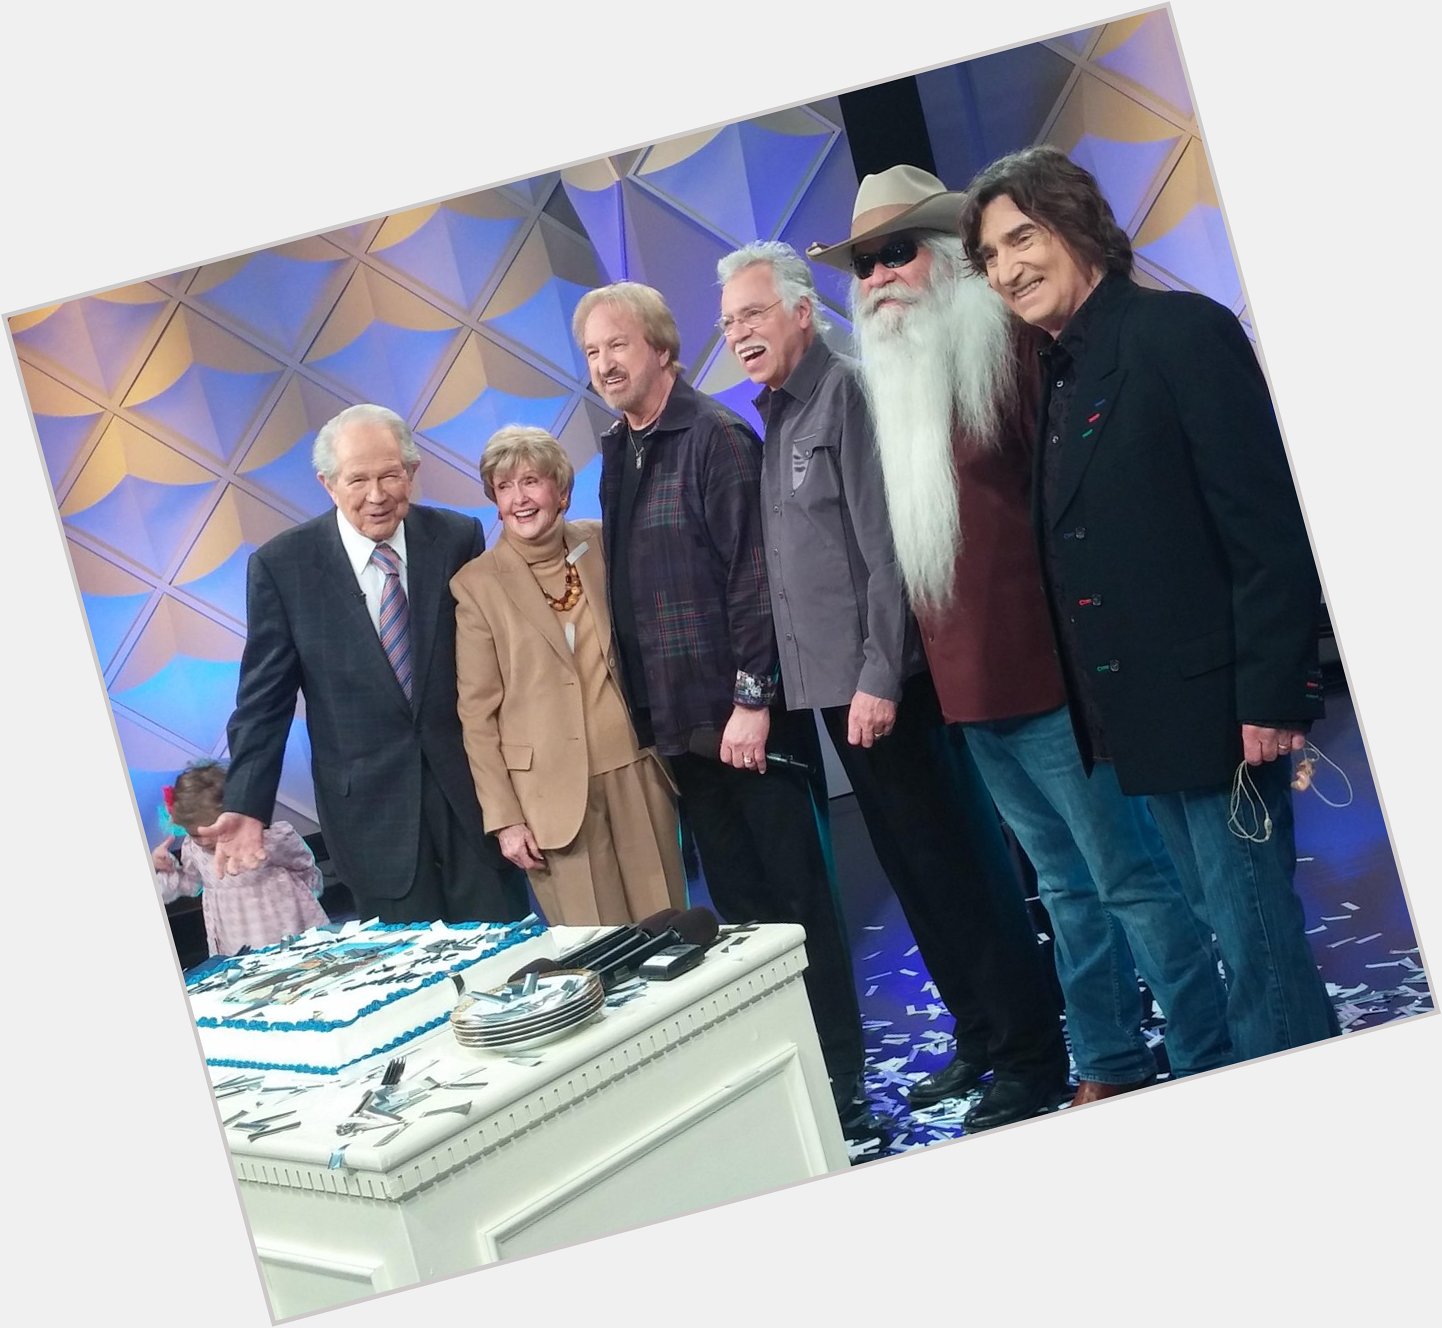 Happy Birthday to my boss & friend Pat Robertson. 85-years young today! Celebrated with the 